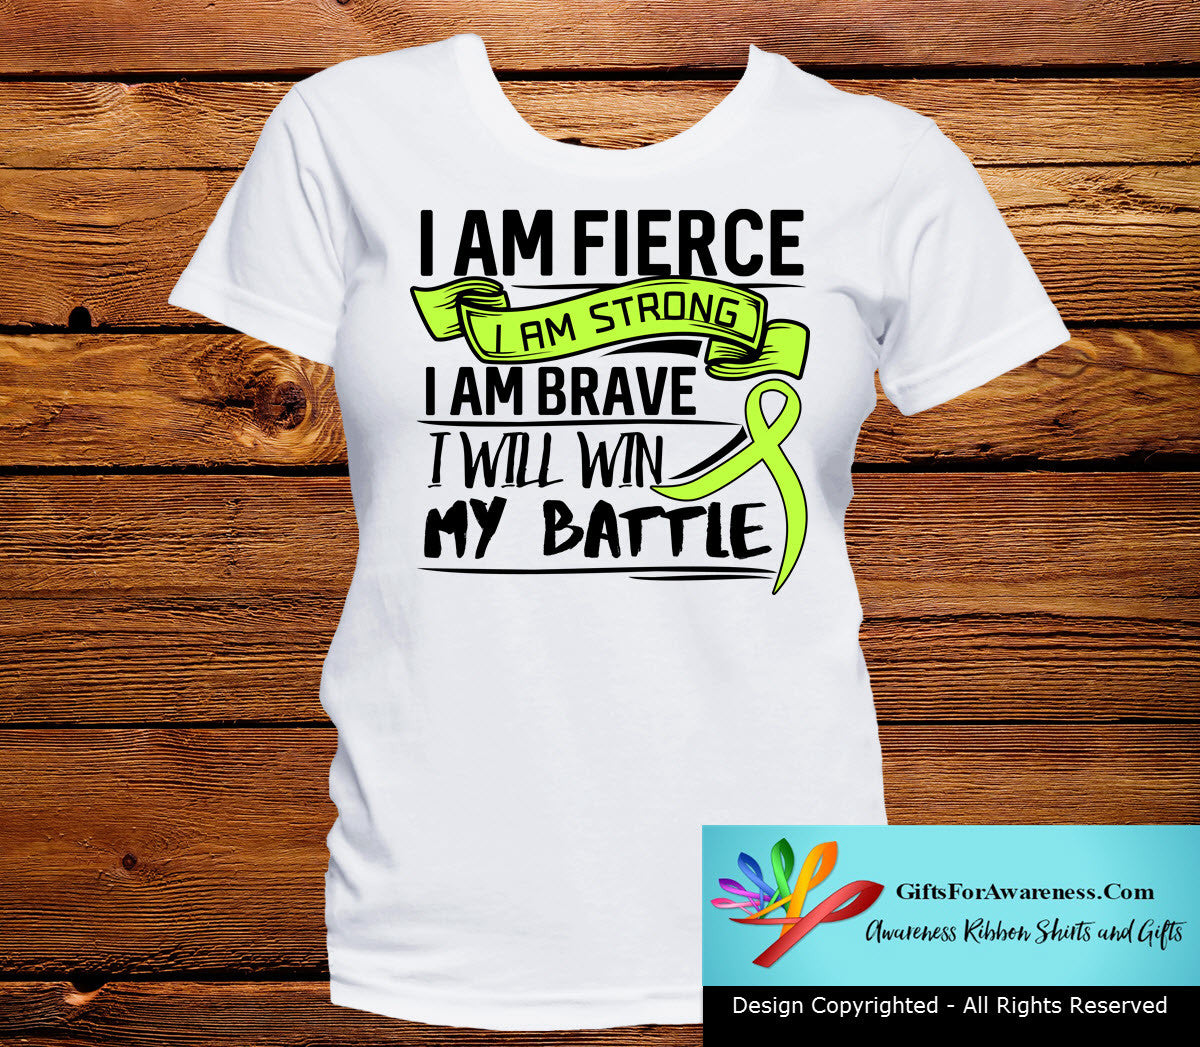 Lyme Disease I Am Fierce Strong and Brave Shirts - GiftsForAwareness